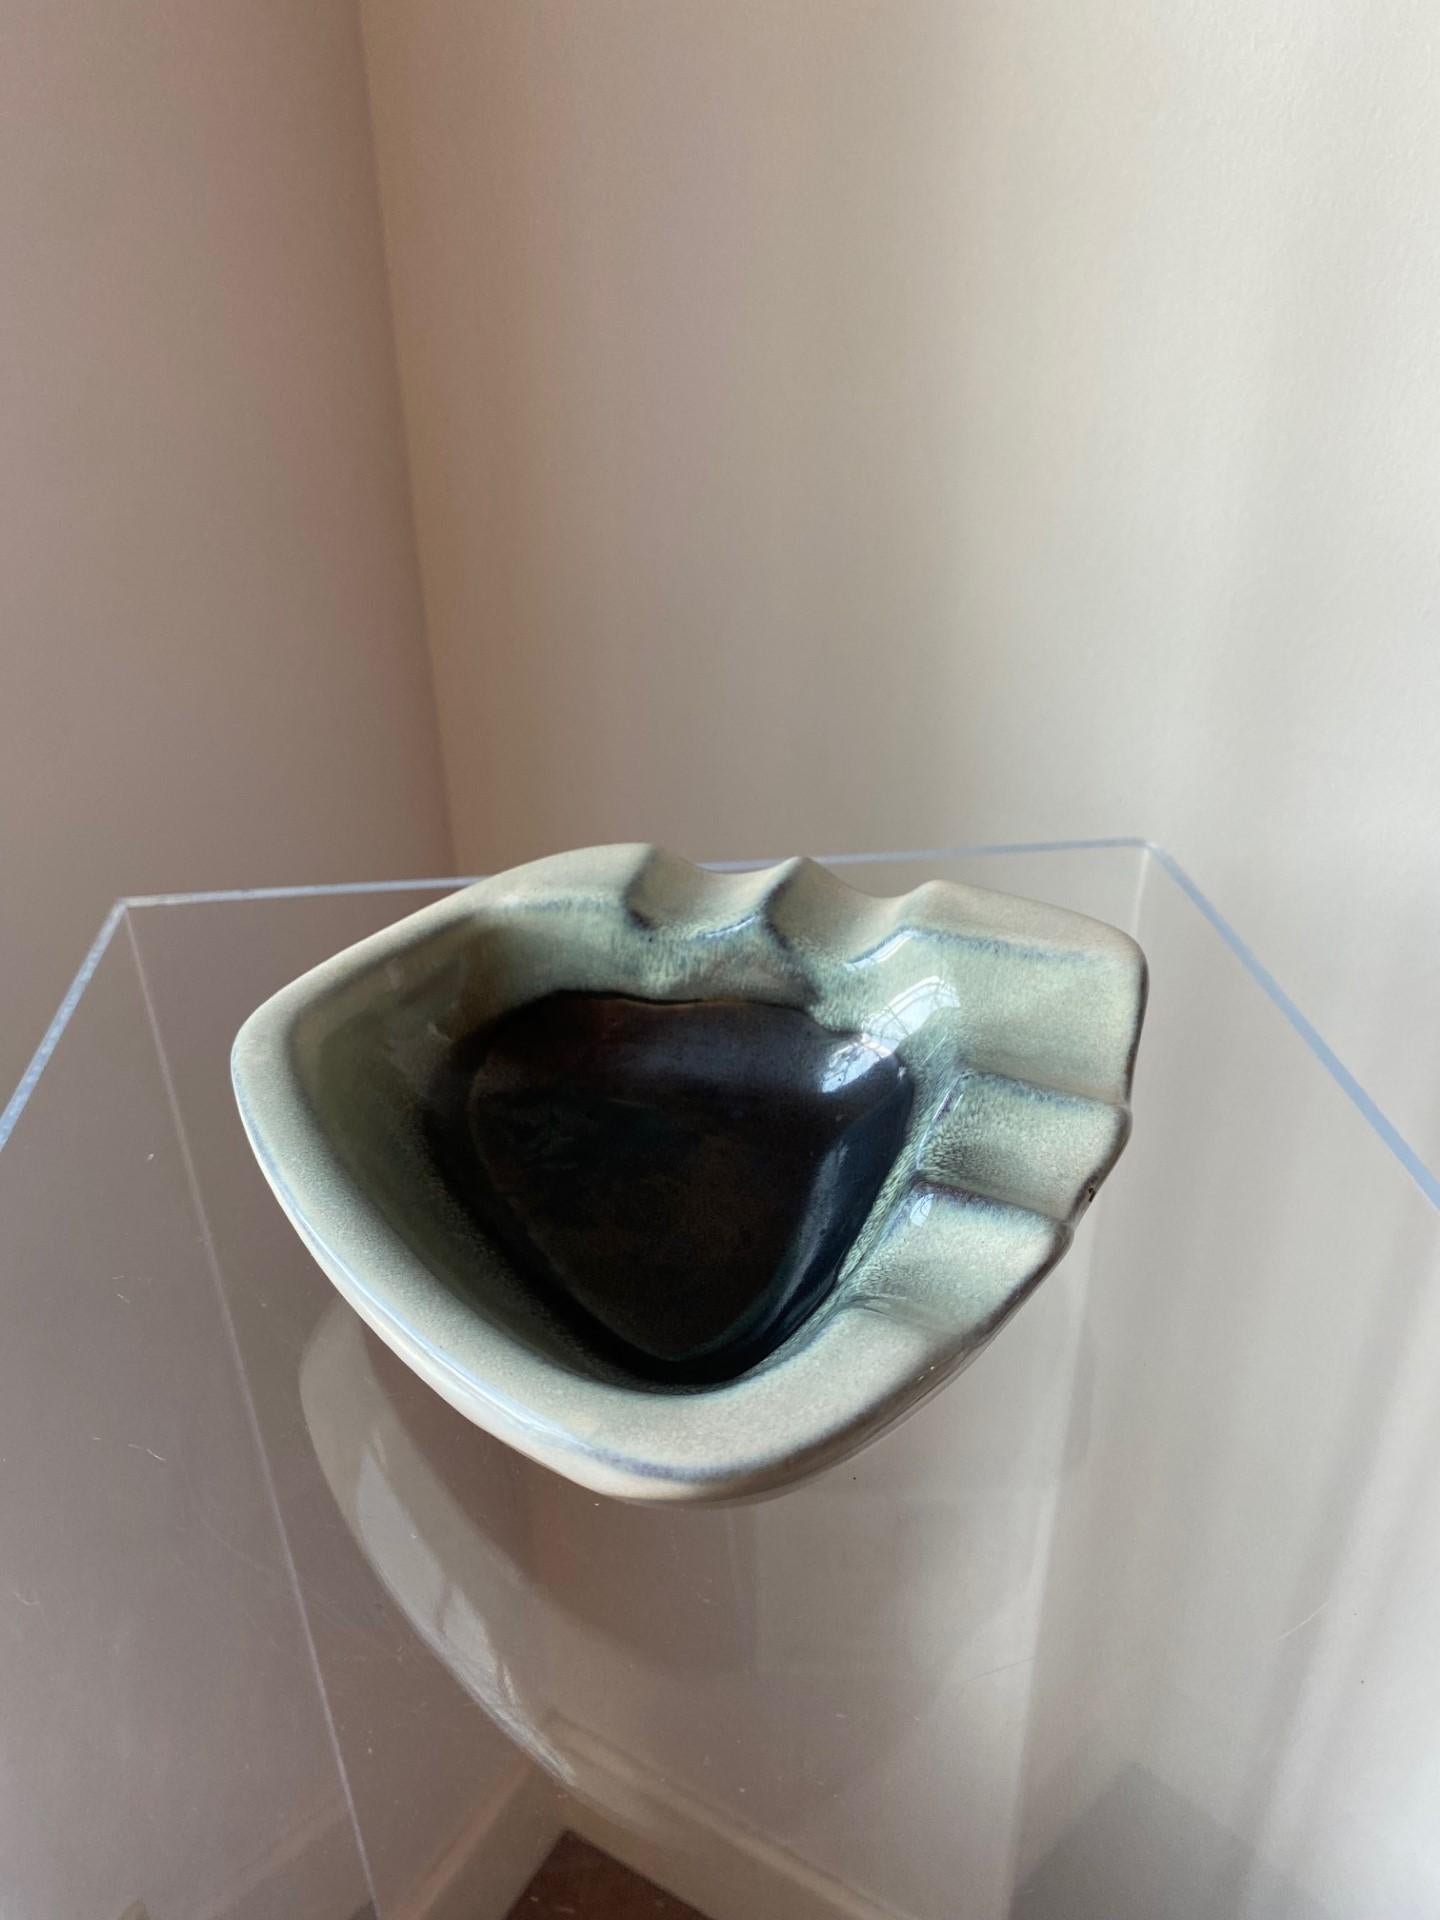 Beautiful ceramic sculptural ashtray in an array of gradient blue glaze. Although originally an ashtray, this piece transcends to a decorative piece or sculpture. With a morphic shape that wraps around ridges that envelop a deep color that goes from